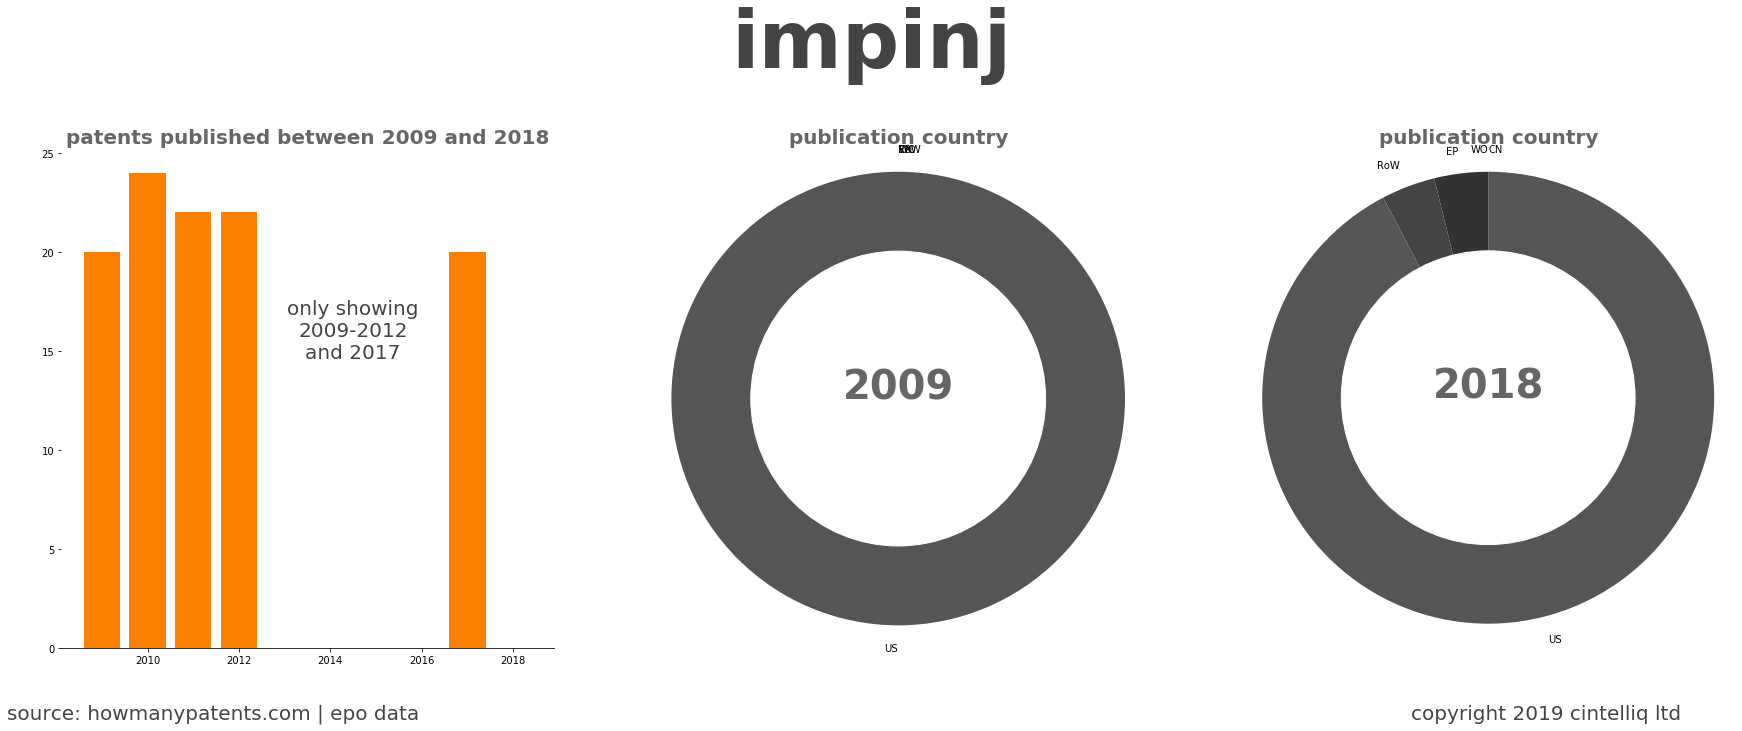 summary of patents for Impinj